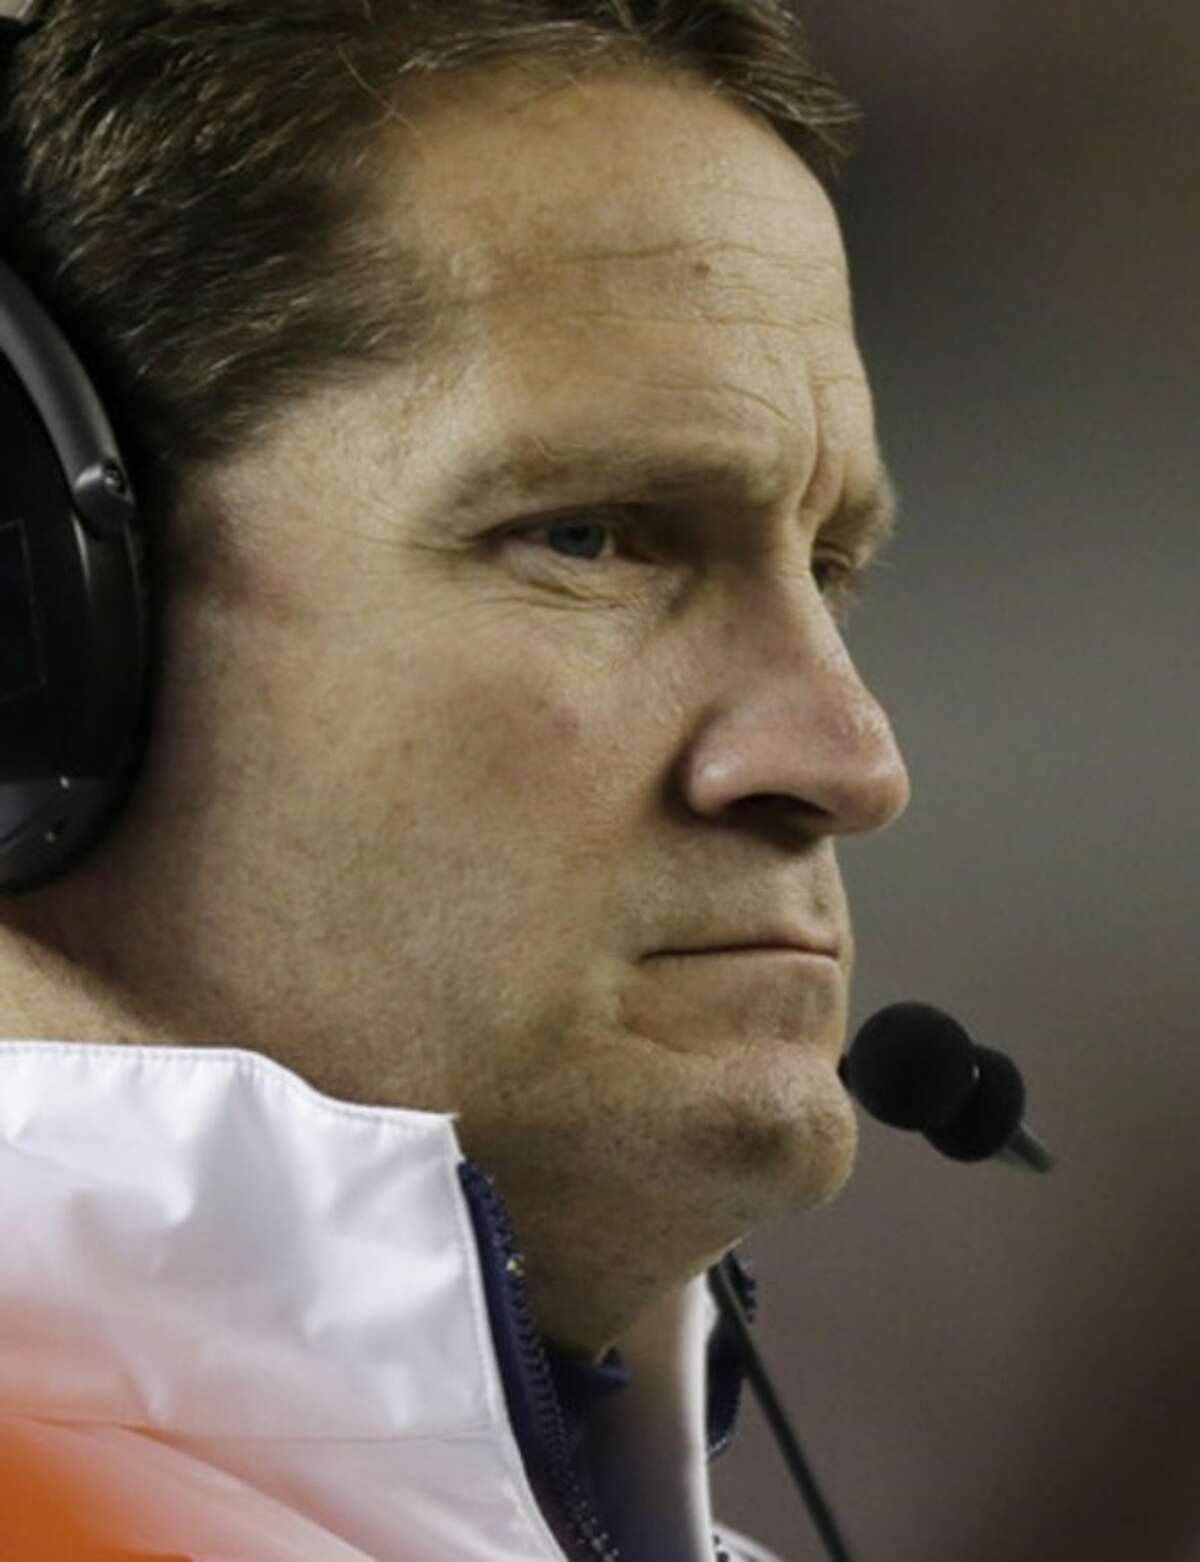 Auburn coach Gene Chizik watches the game near the end of a 49-0 loss to Alabama during the second half of a NCAA college football game at Bryant-Denny Stadium in Tuscaloosa, Ala., Saturday, Nov. 24, 2012. (AP Photo/Dave Martin)